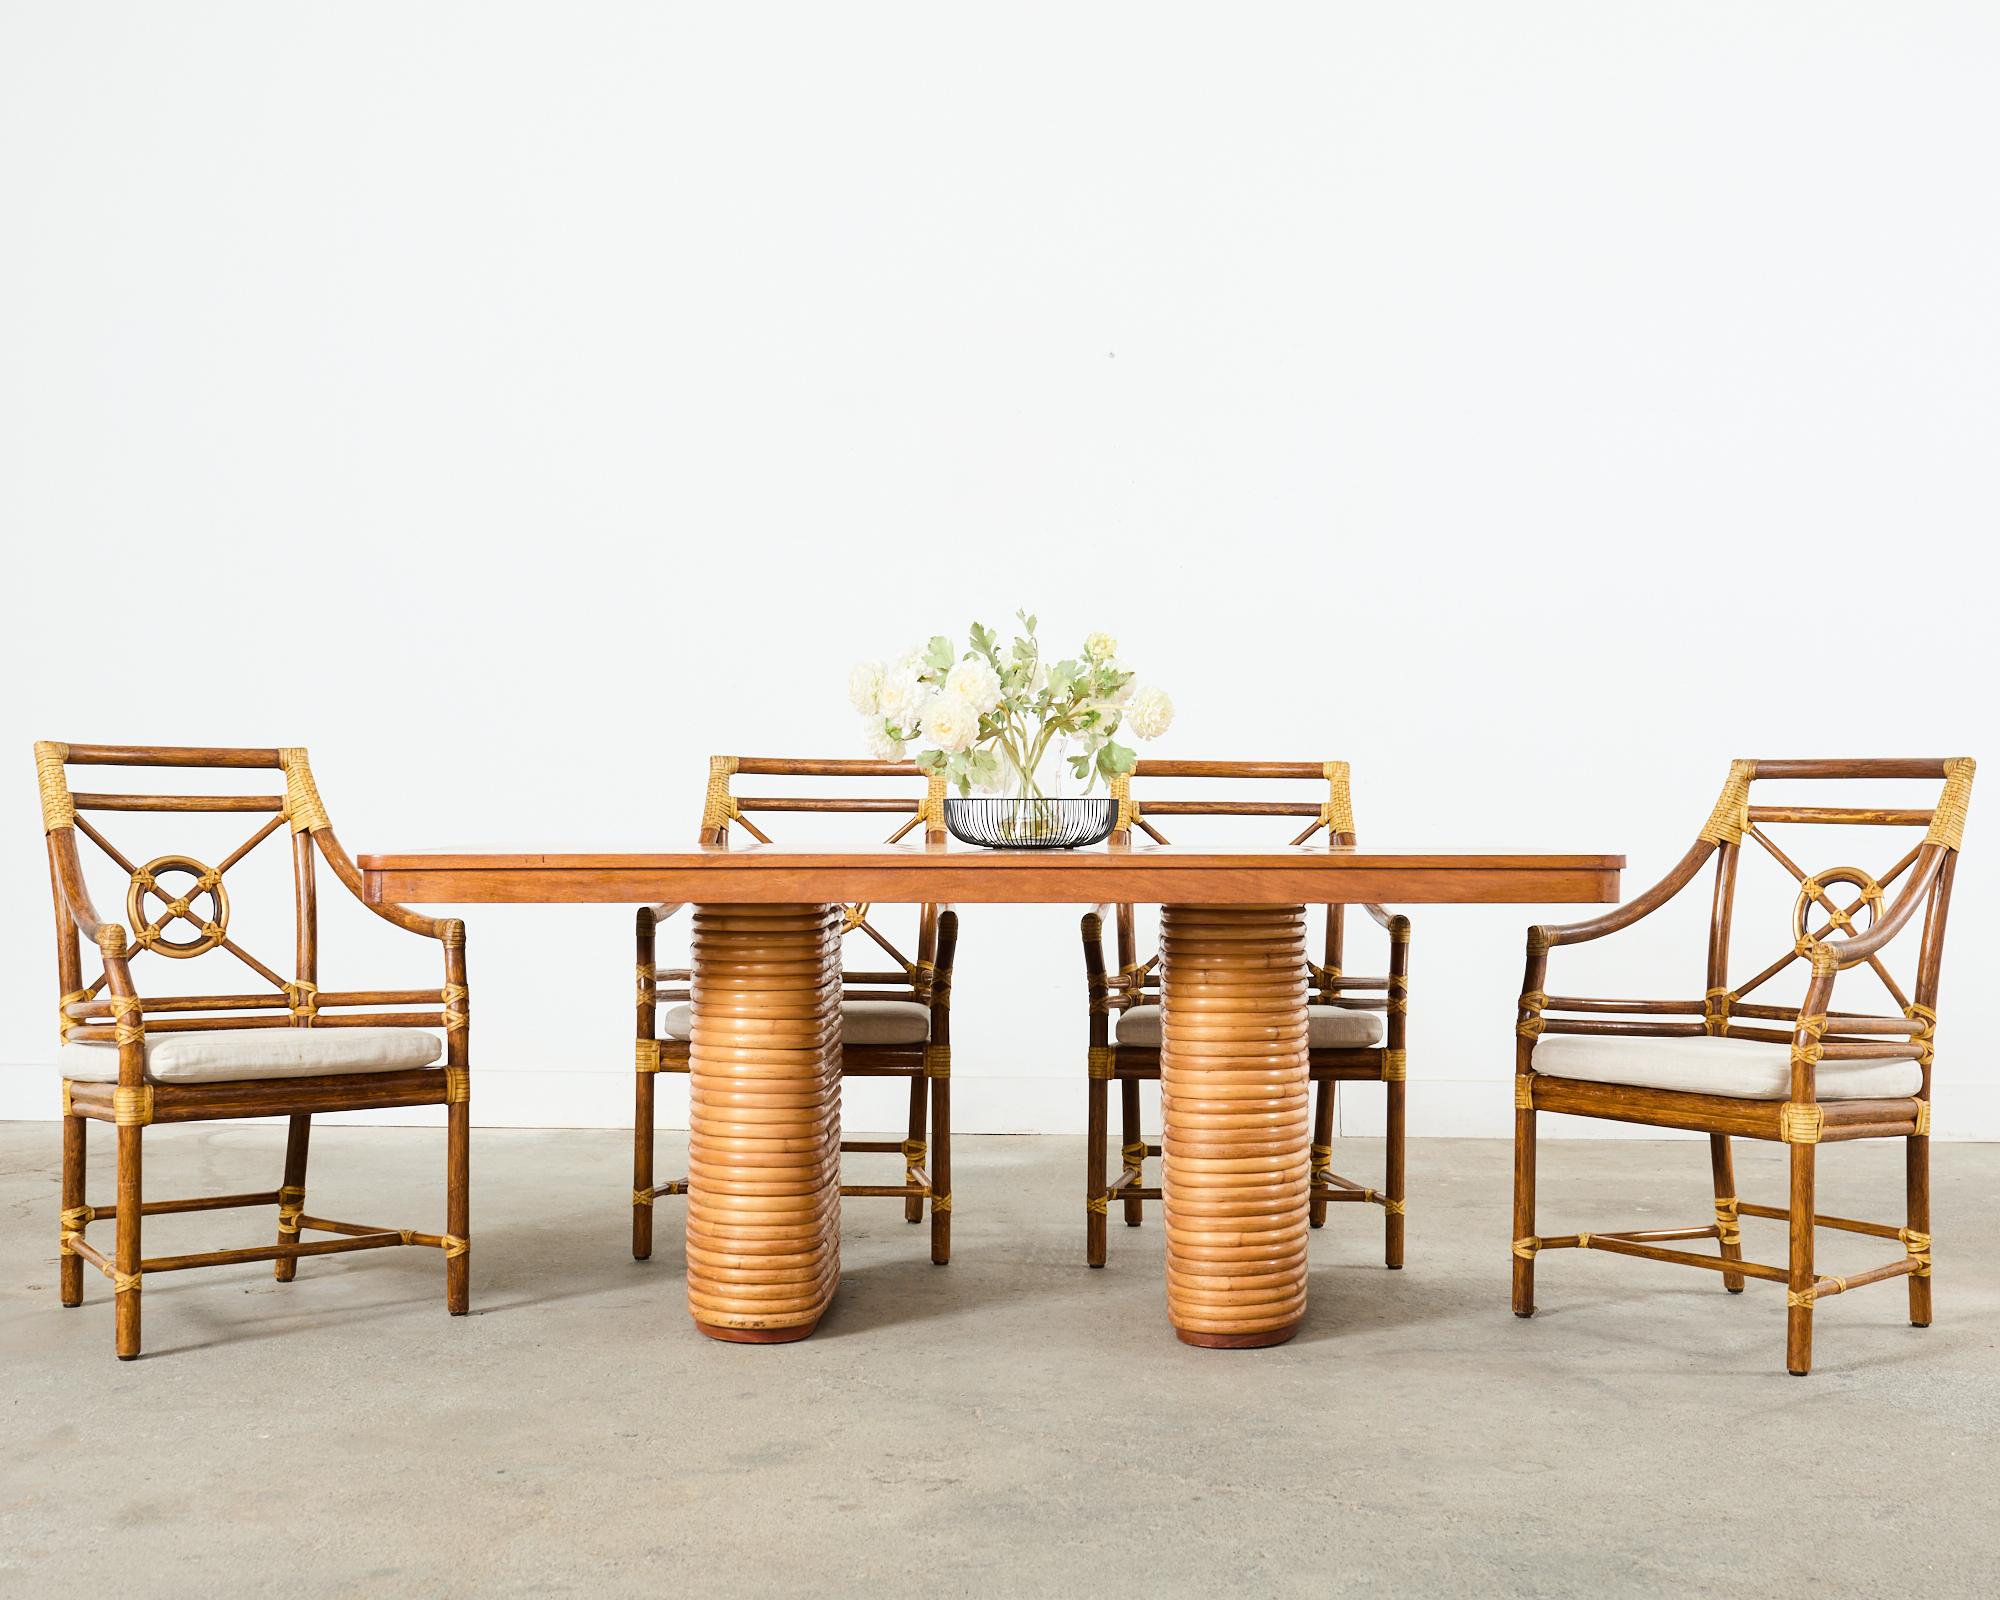 Distinctive mid-century modern hardwood dining table made in the manner and style of Paul Frankl. The table features an iconic profile of double stacked rattan pedestals supporting a rectangular hardwood top. The top is 3 inches thick with a warm